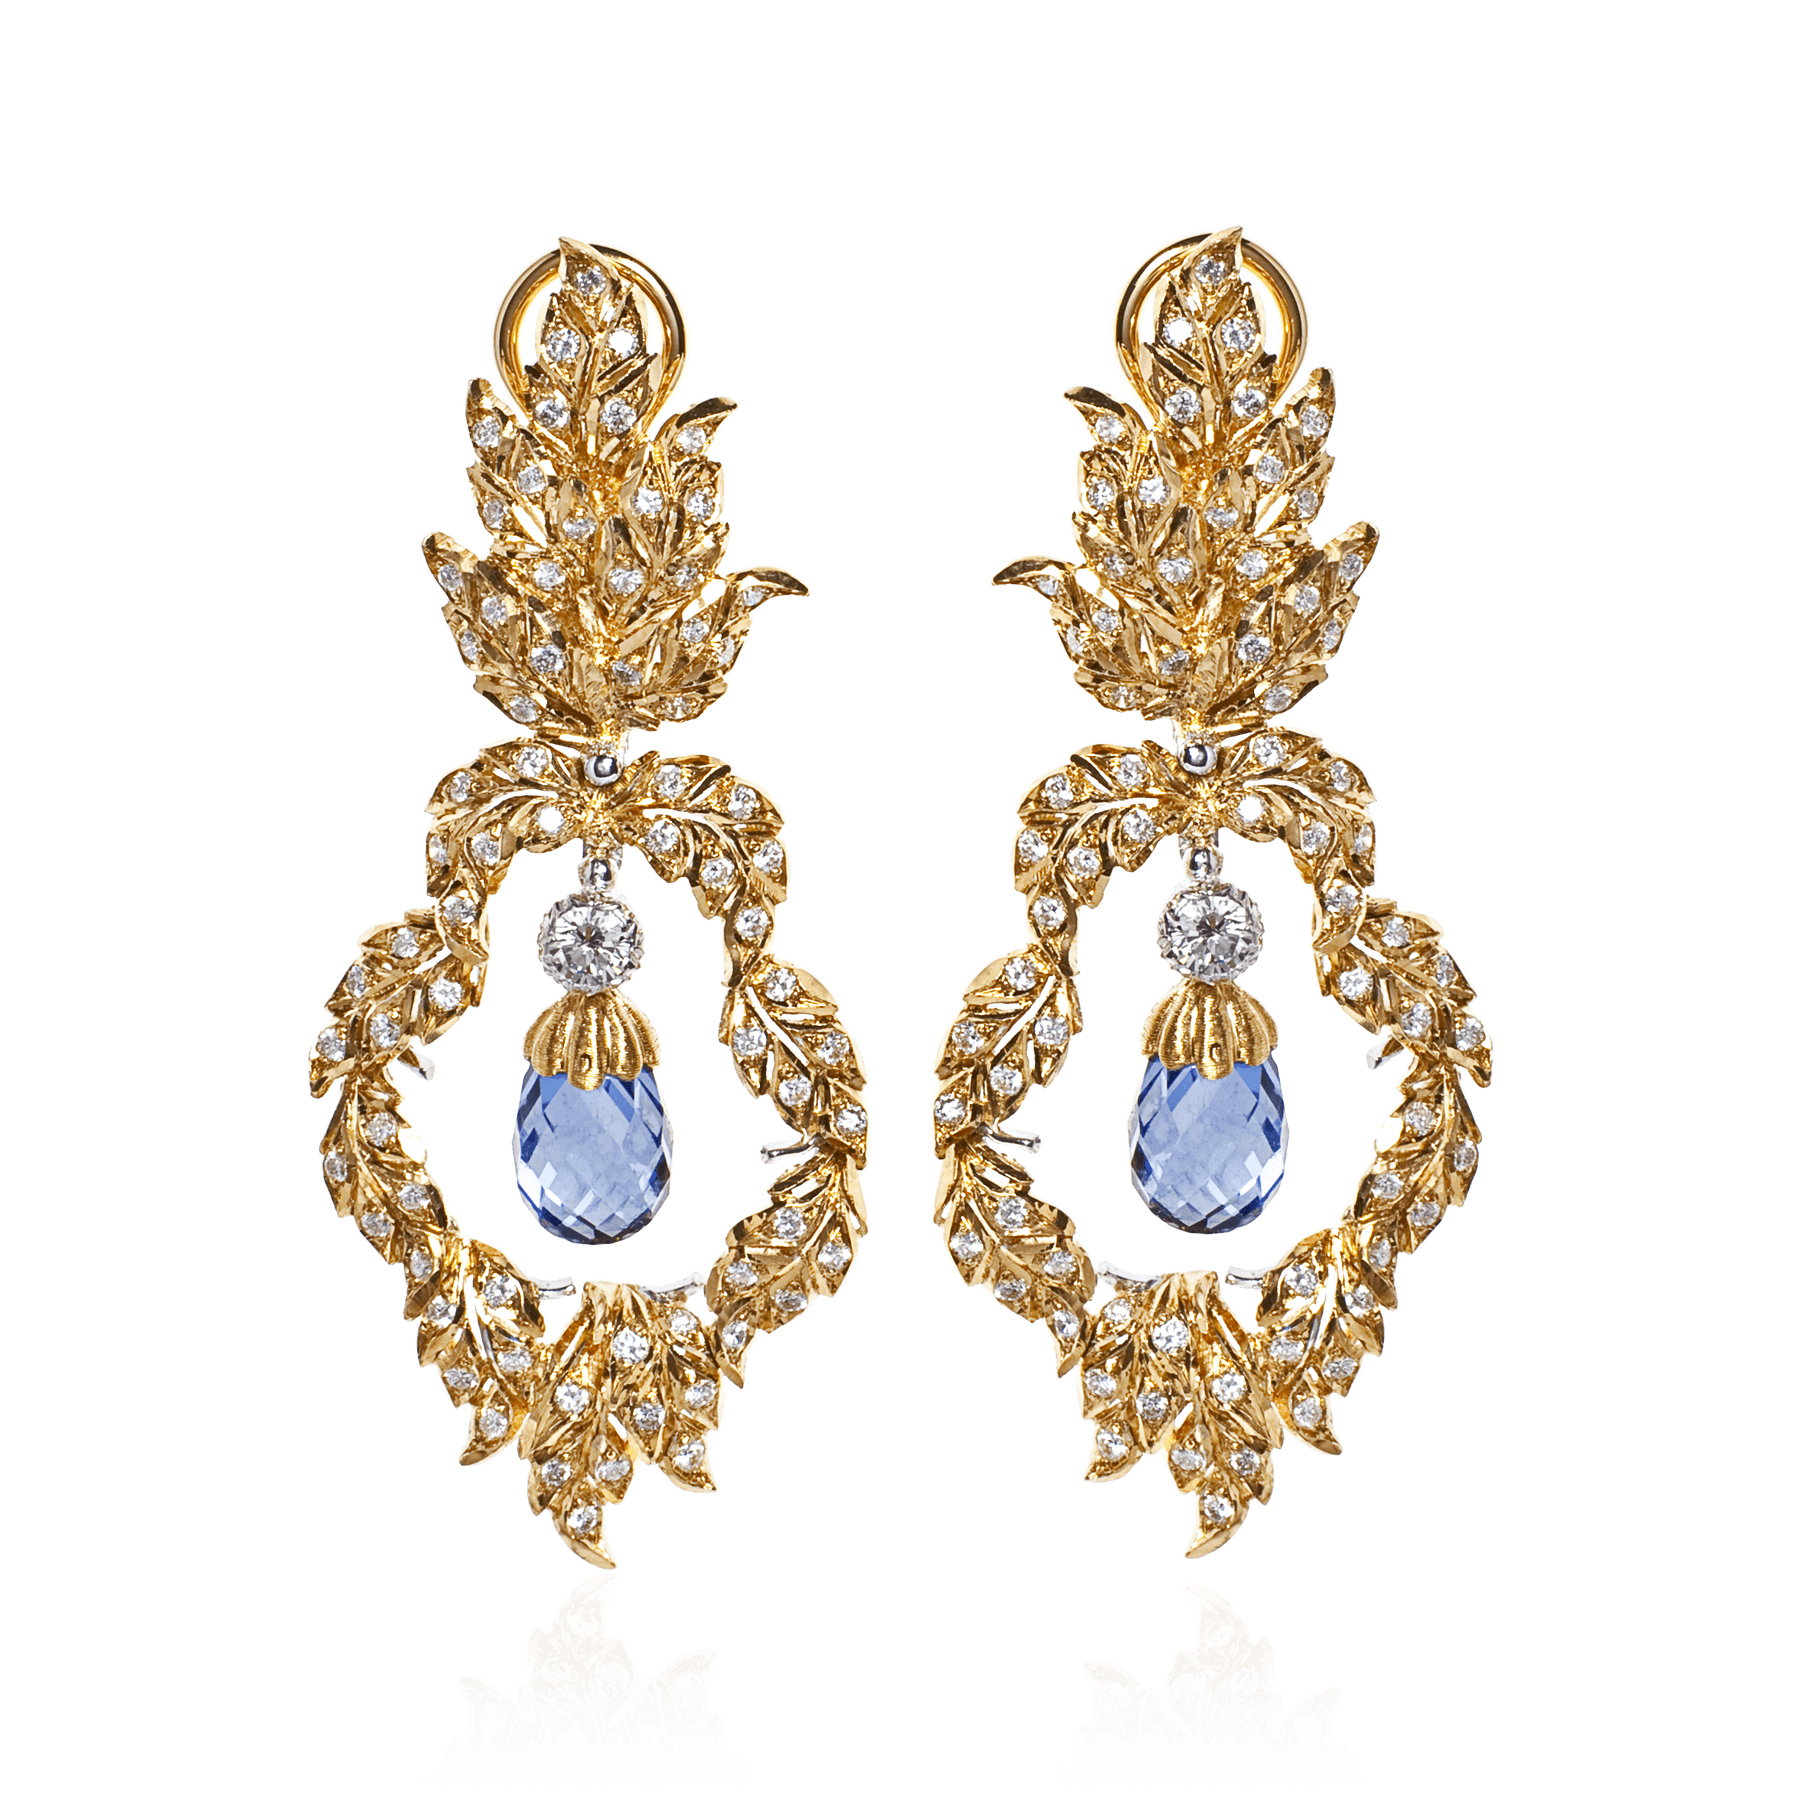 Buccellati gold diamond and sapphire earrings with jewel in center